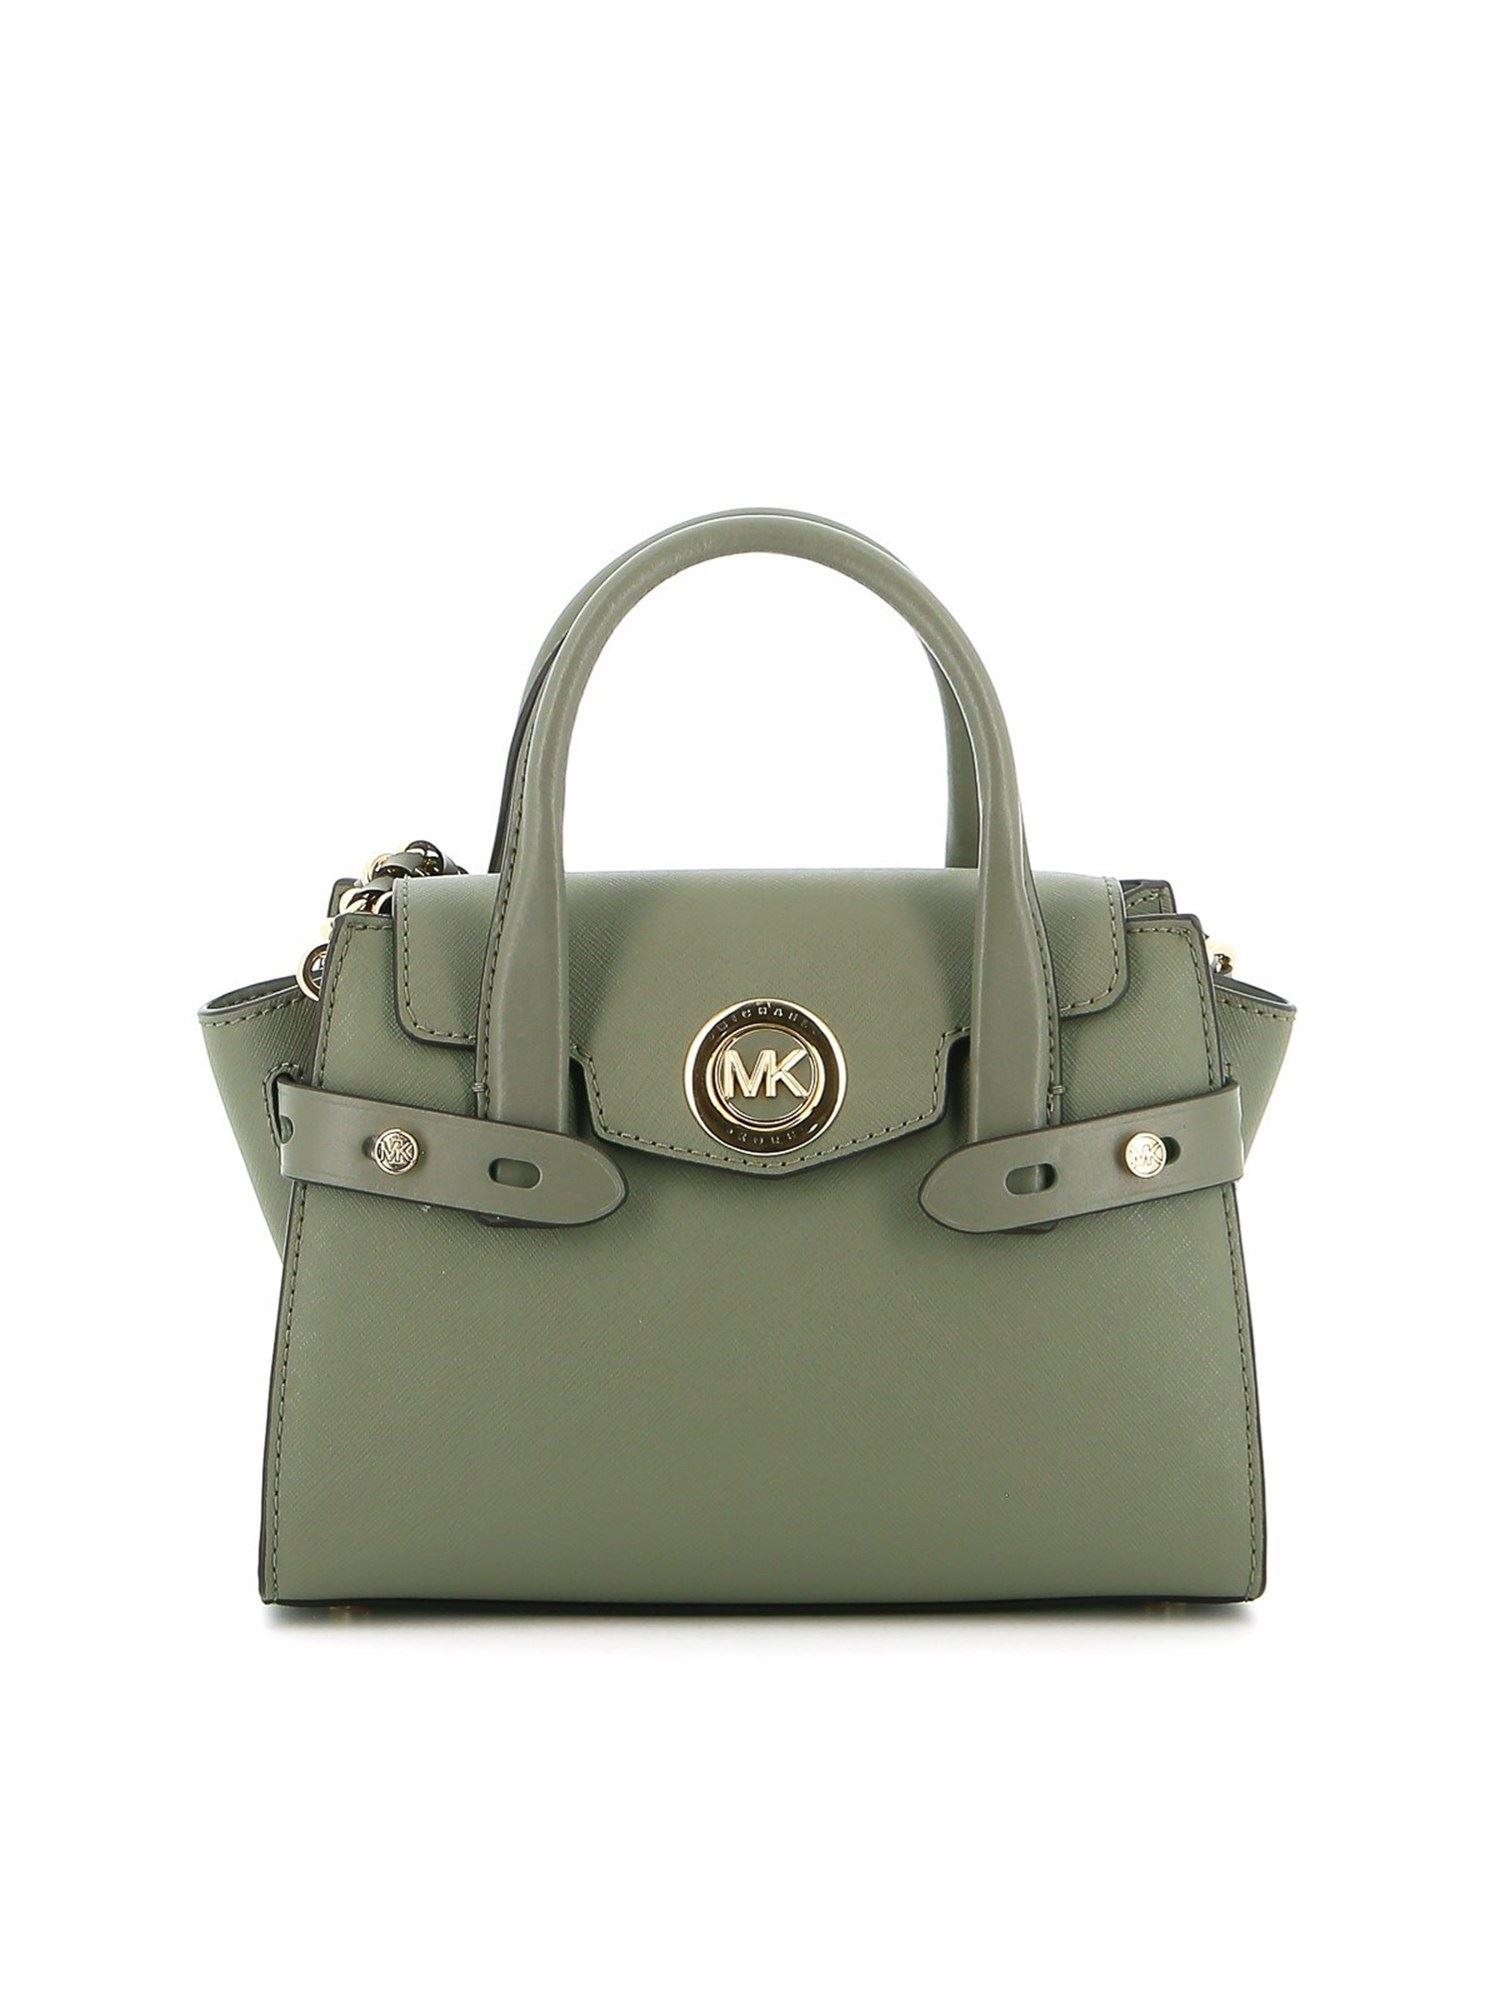 Michael Kors Leather Carmen Extra-small Bag in Green - Lyst